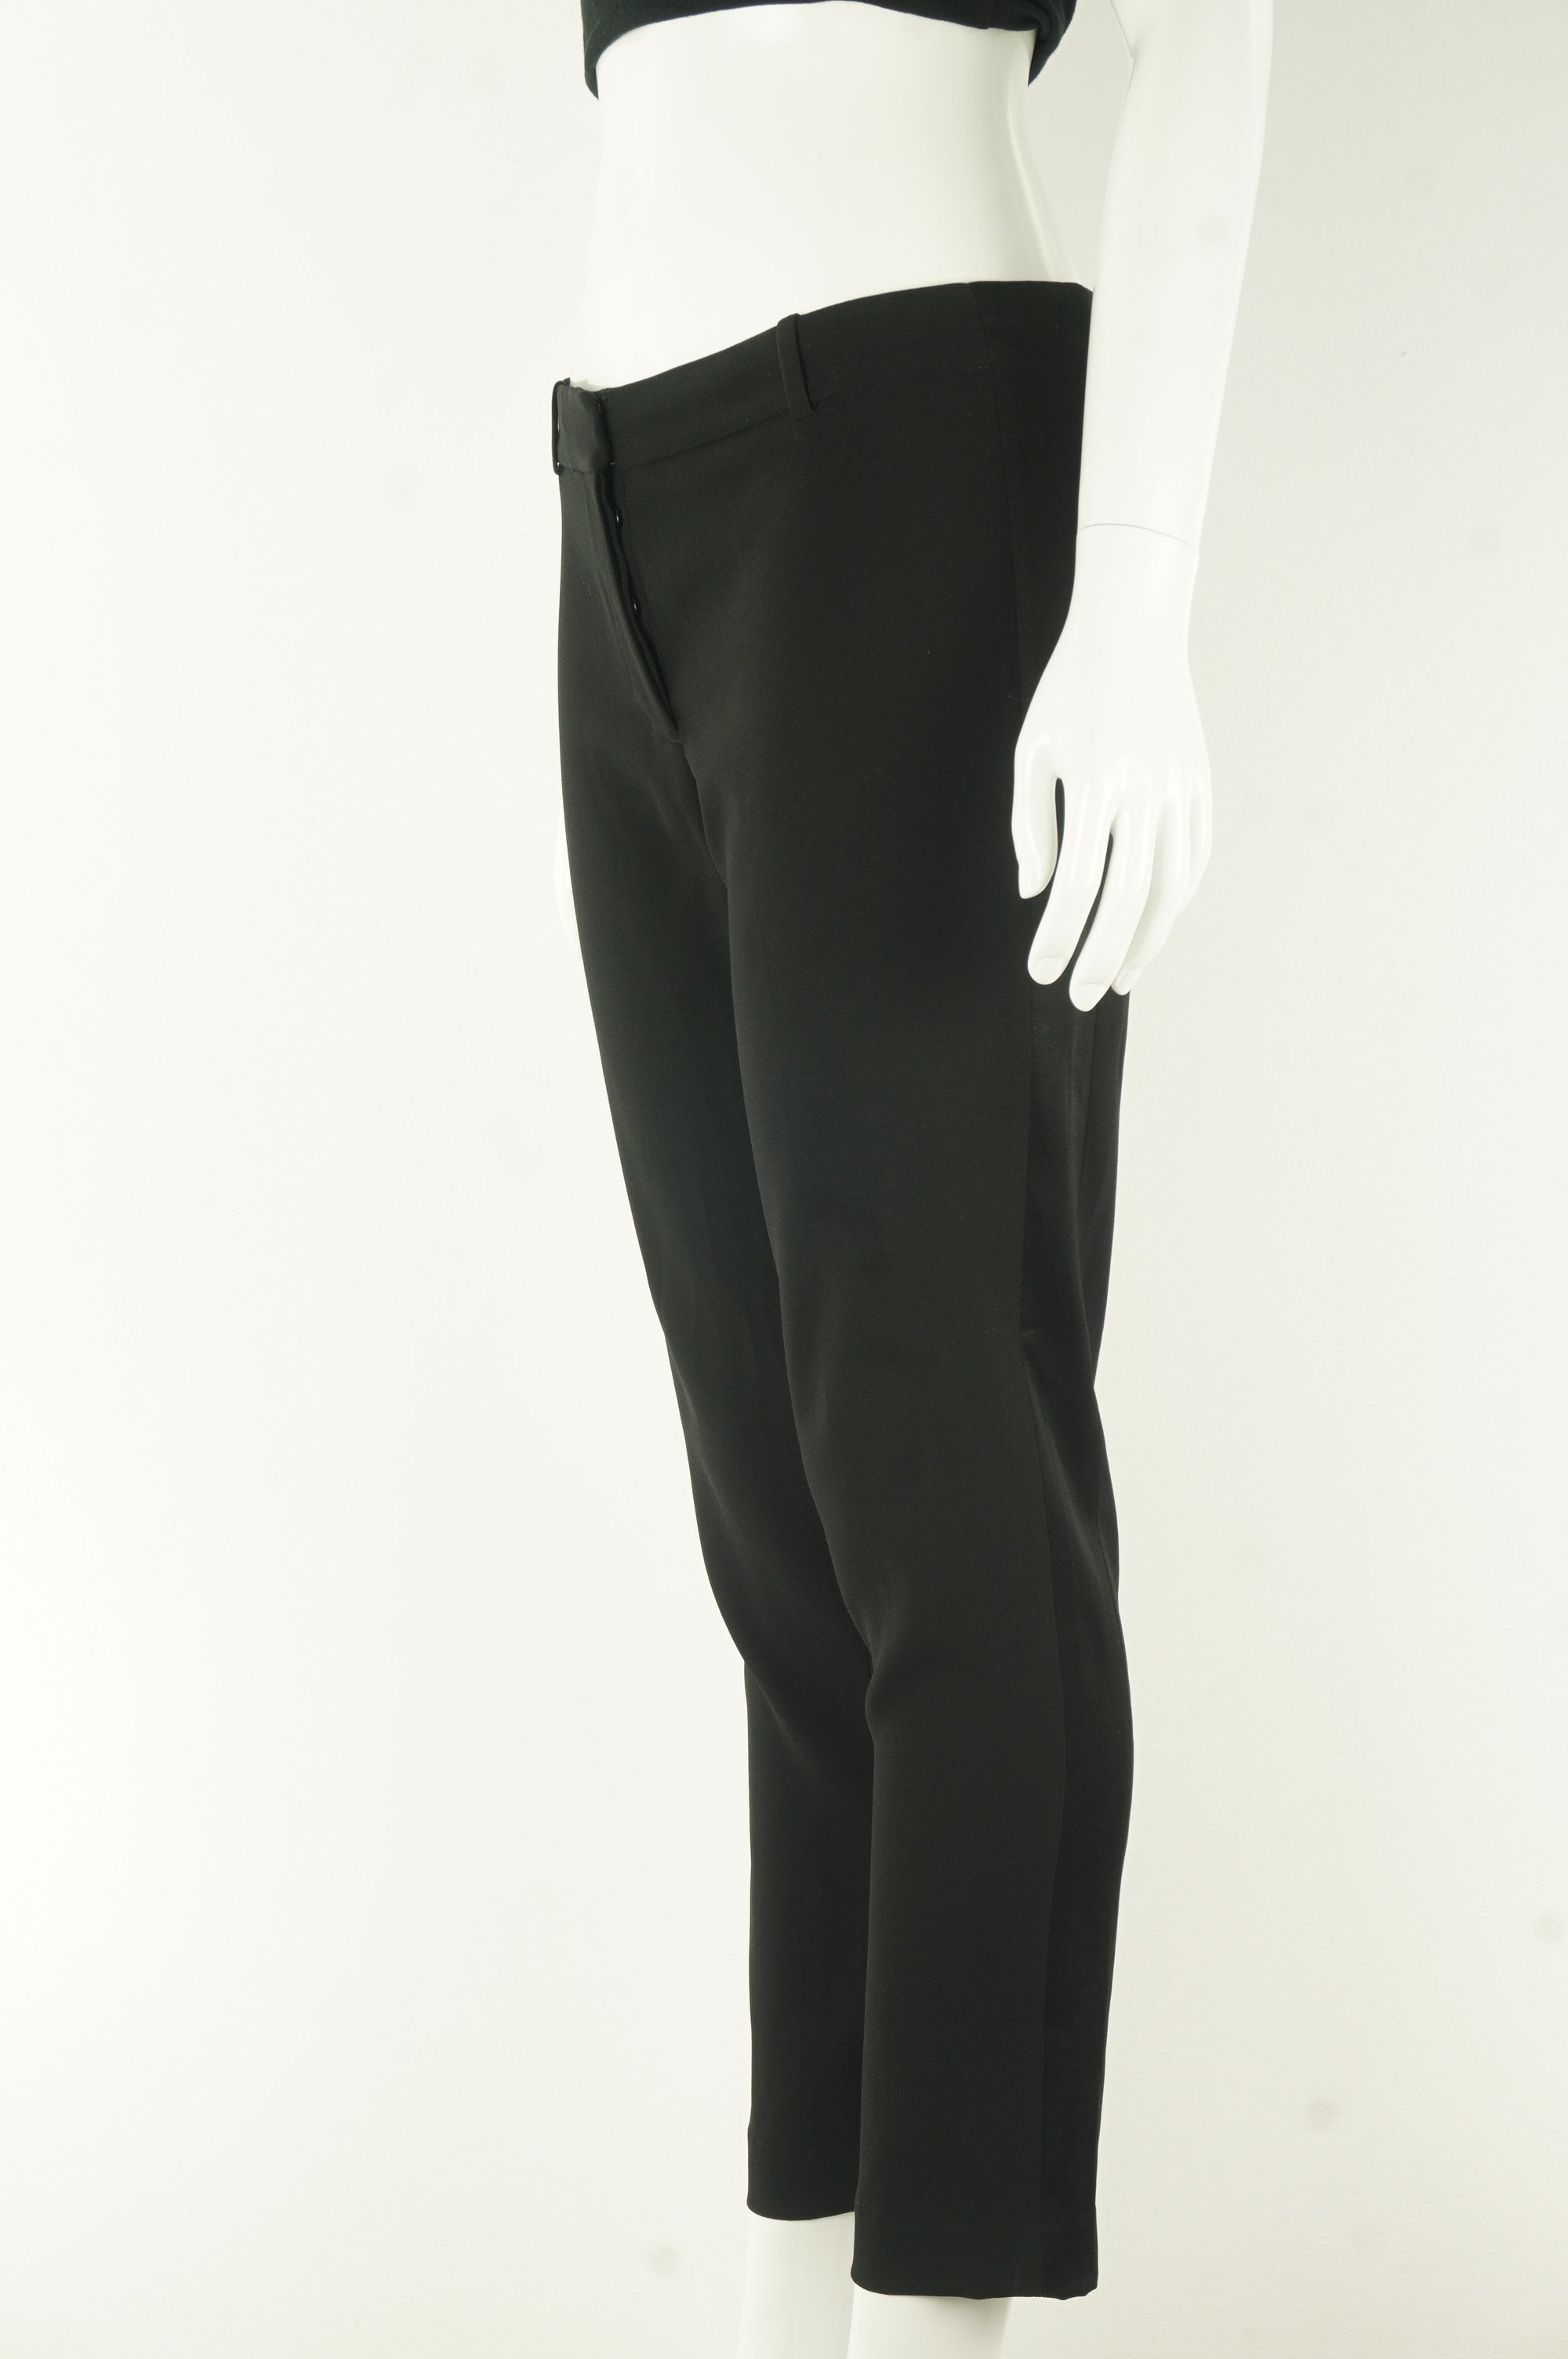 Le Fou Wilfred + Super high-rise faux leather pants